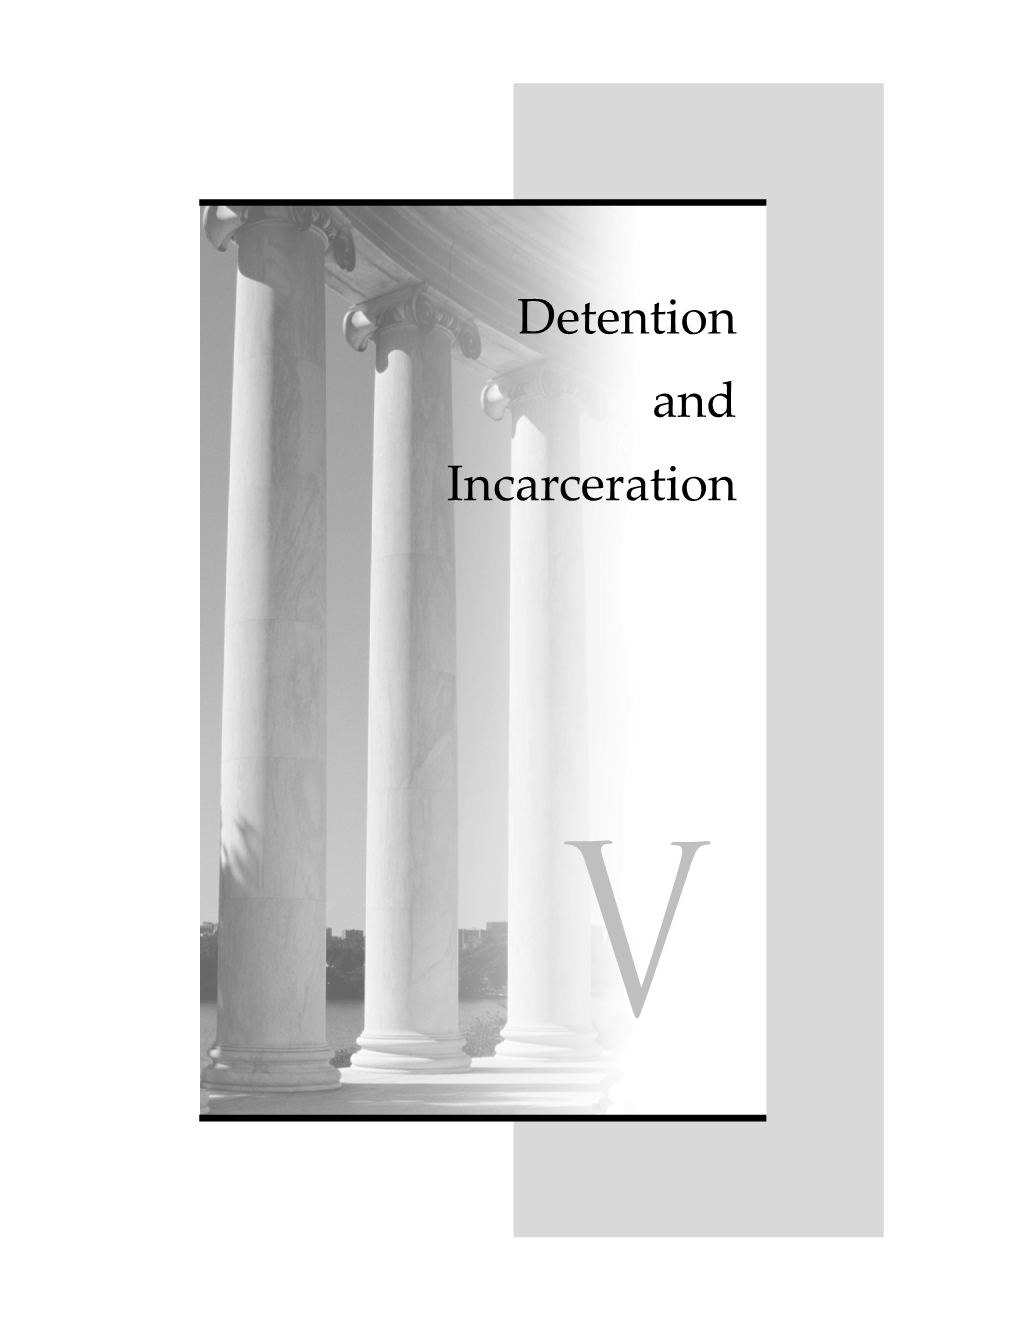 Detention and Incarceration